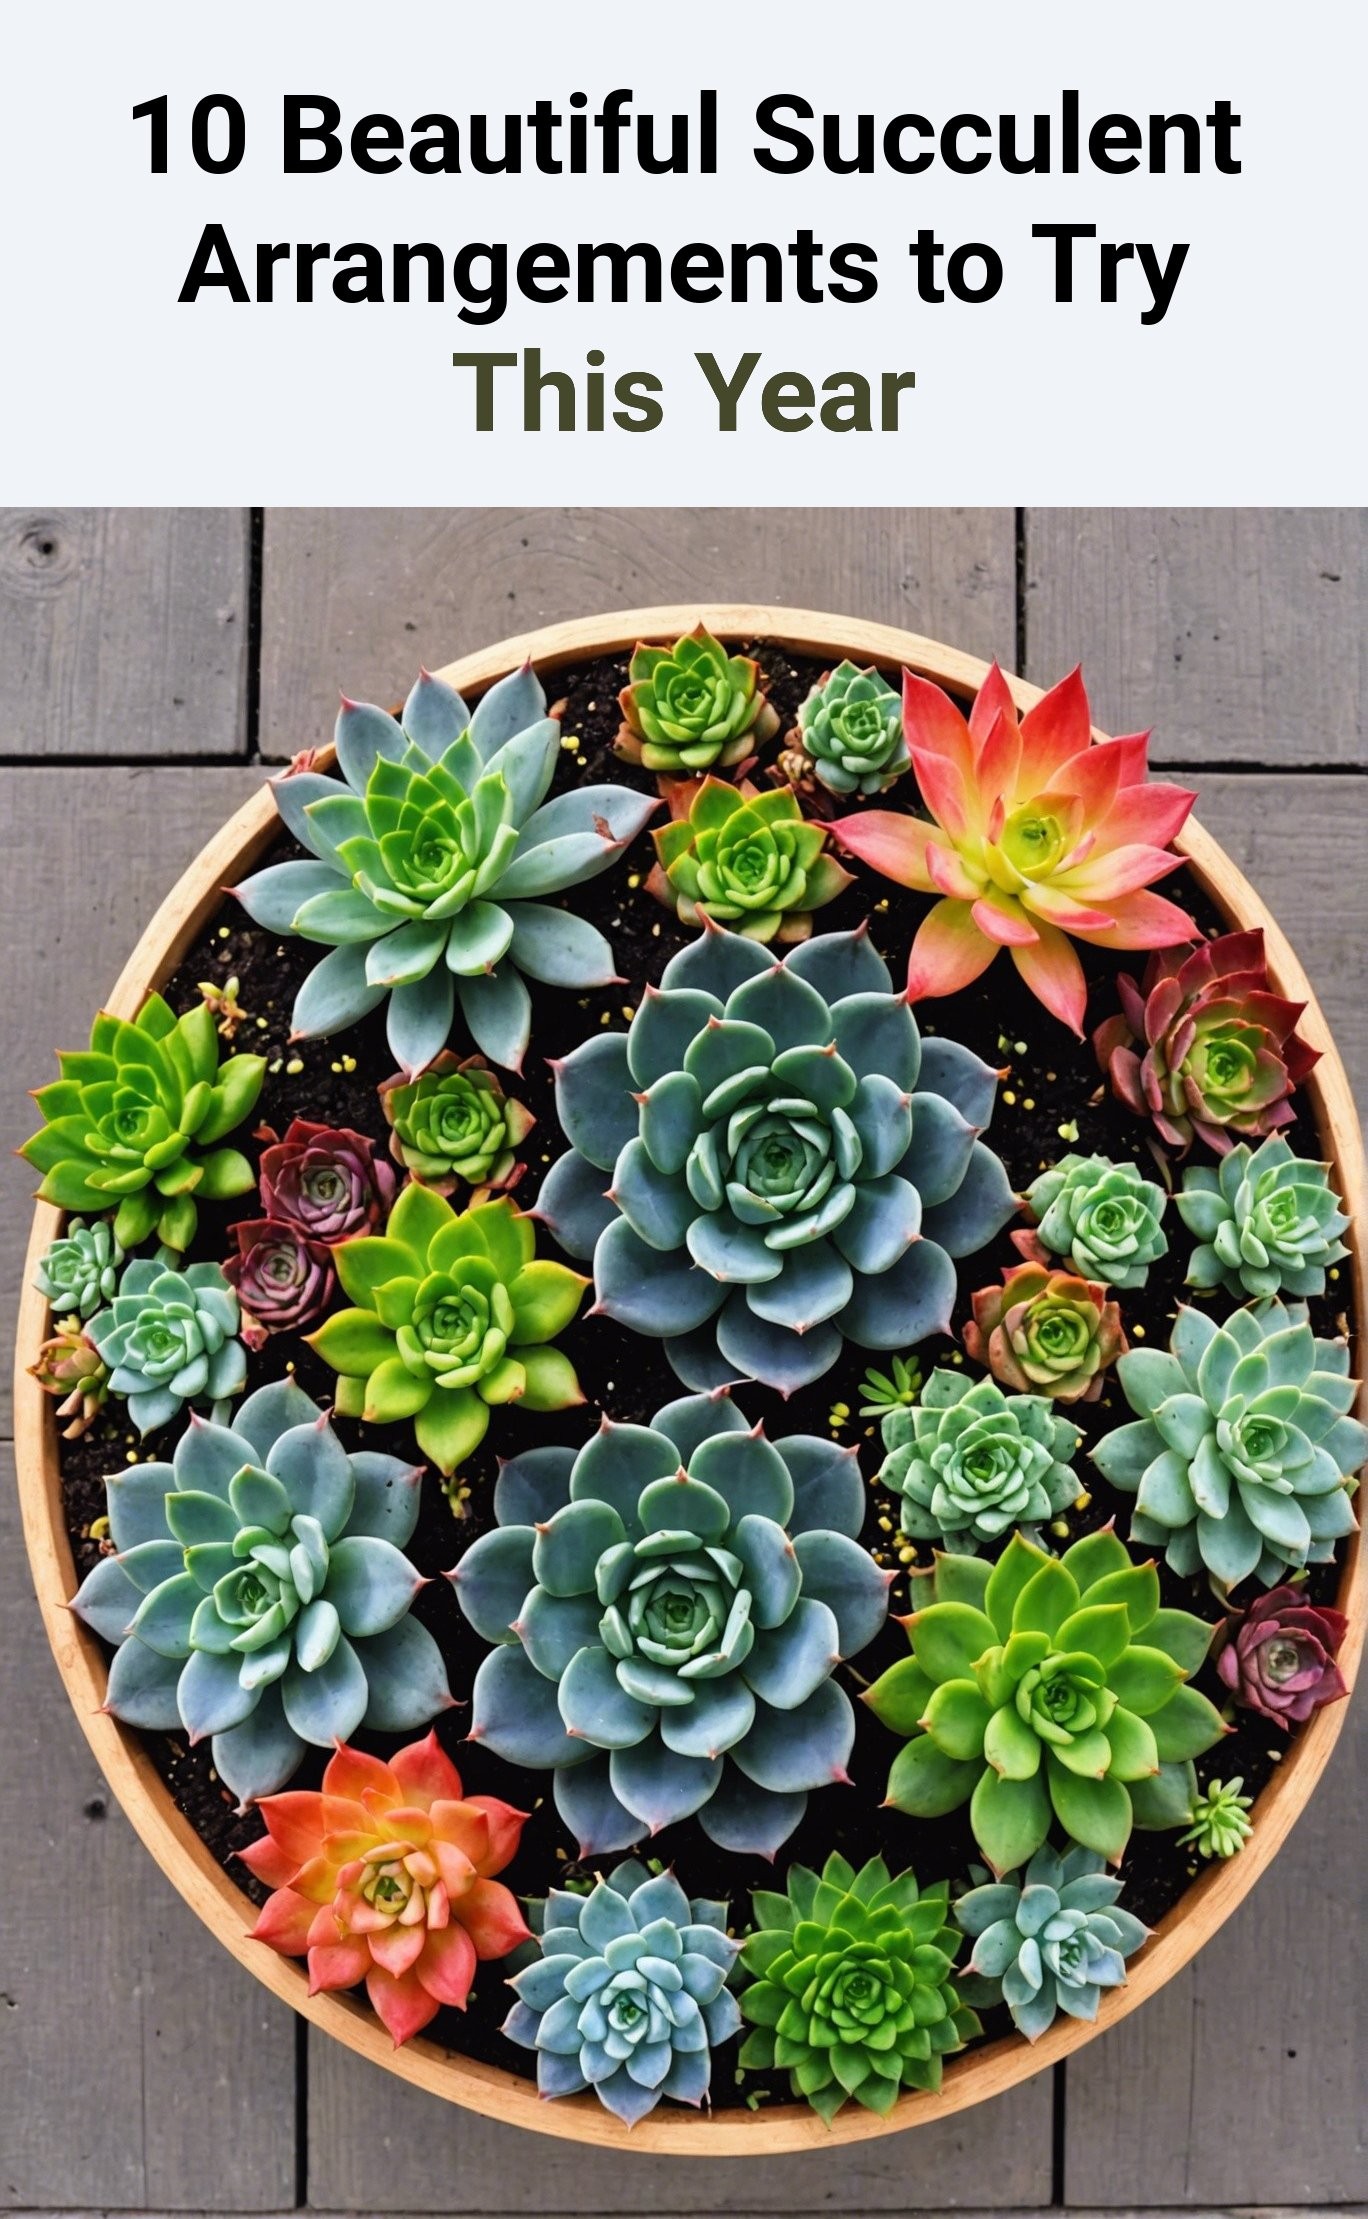 10 Beautiful Succulent Arrangements to Try This Year